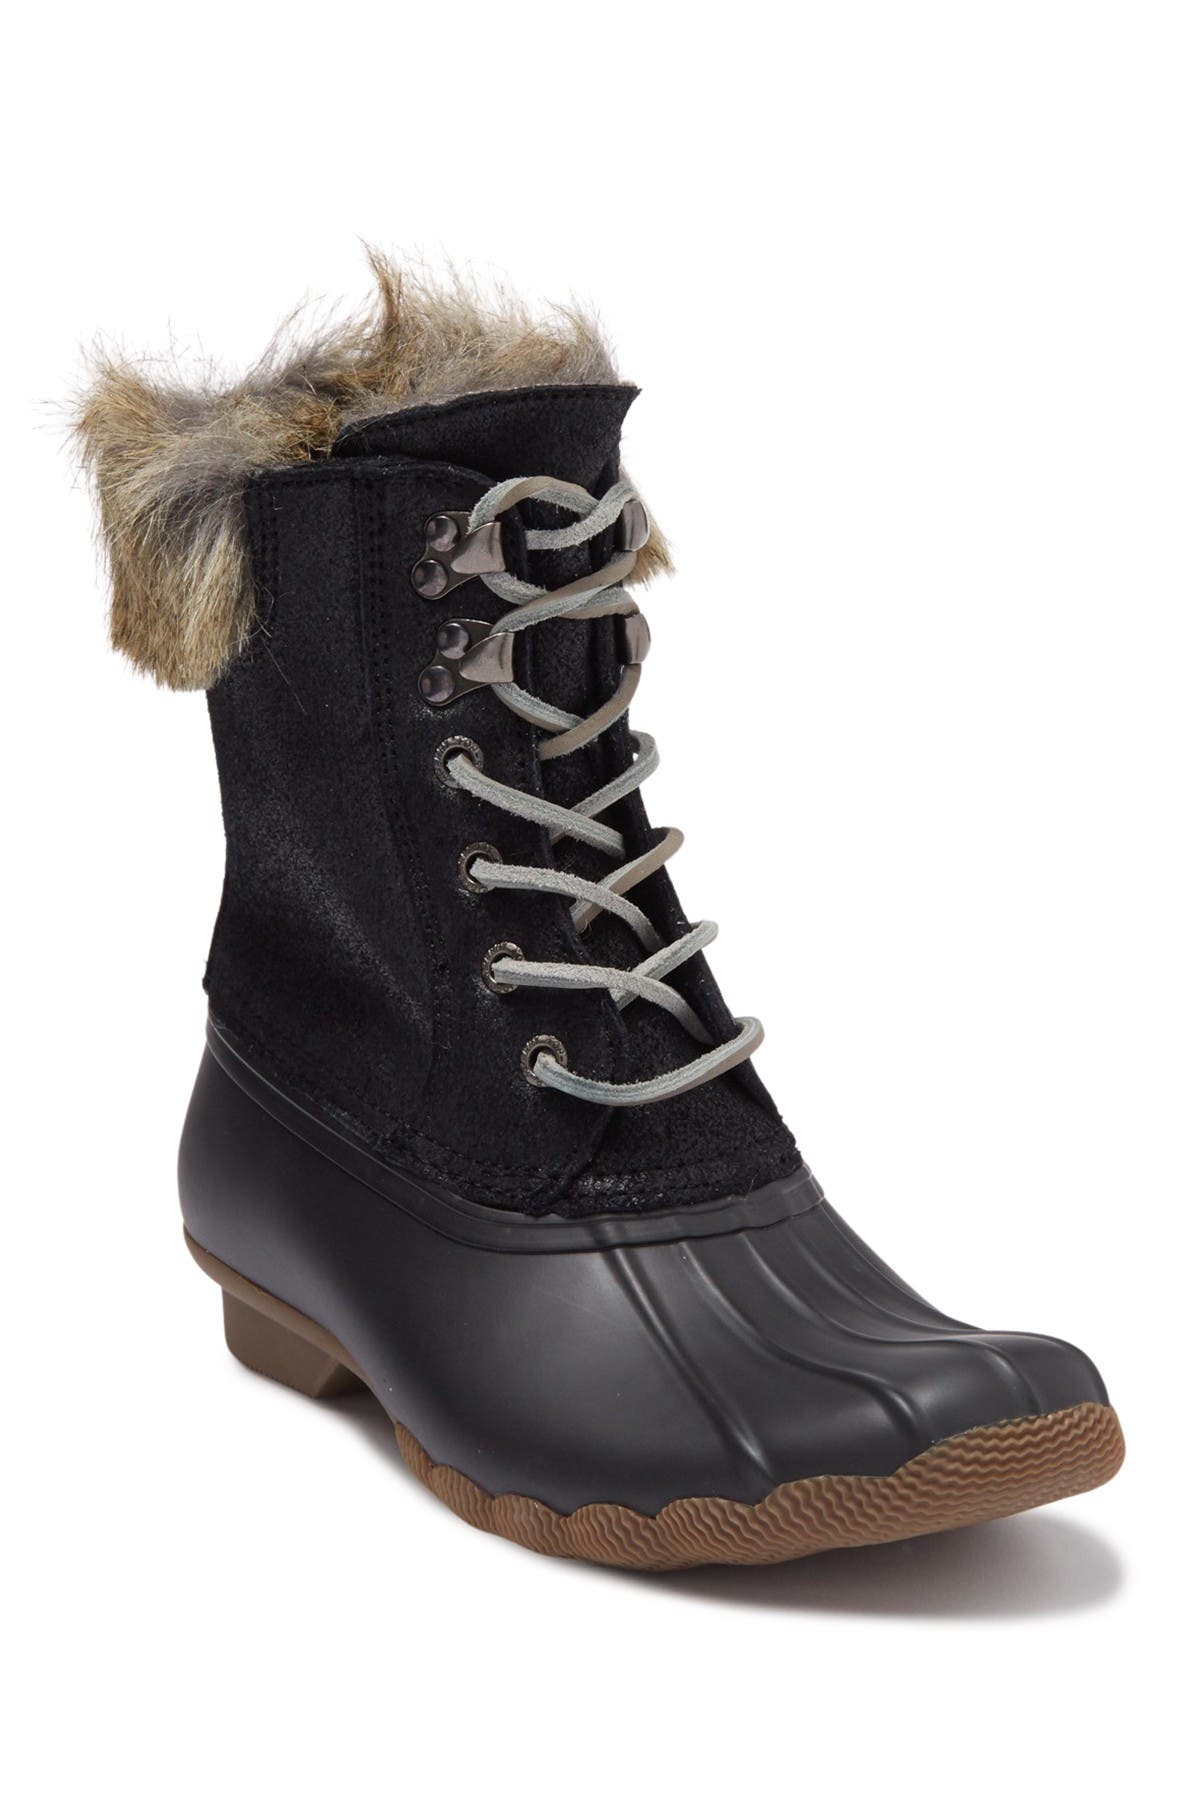 sperry fur lined duck boots